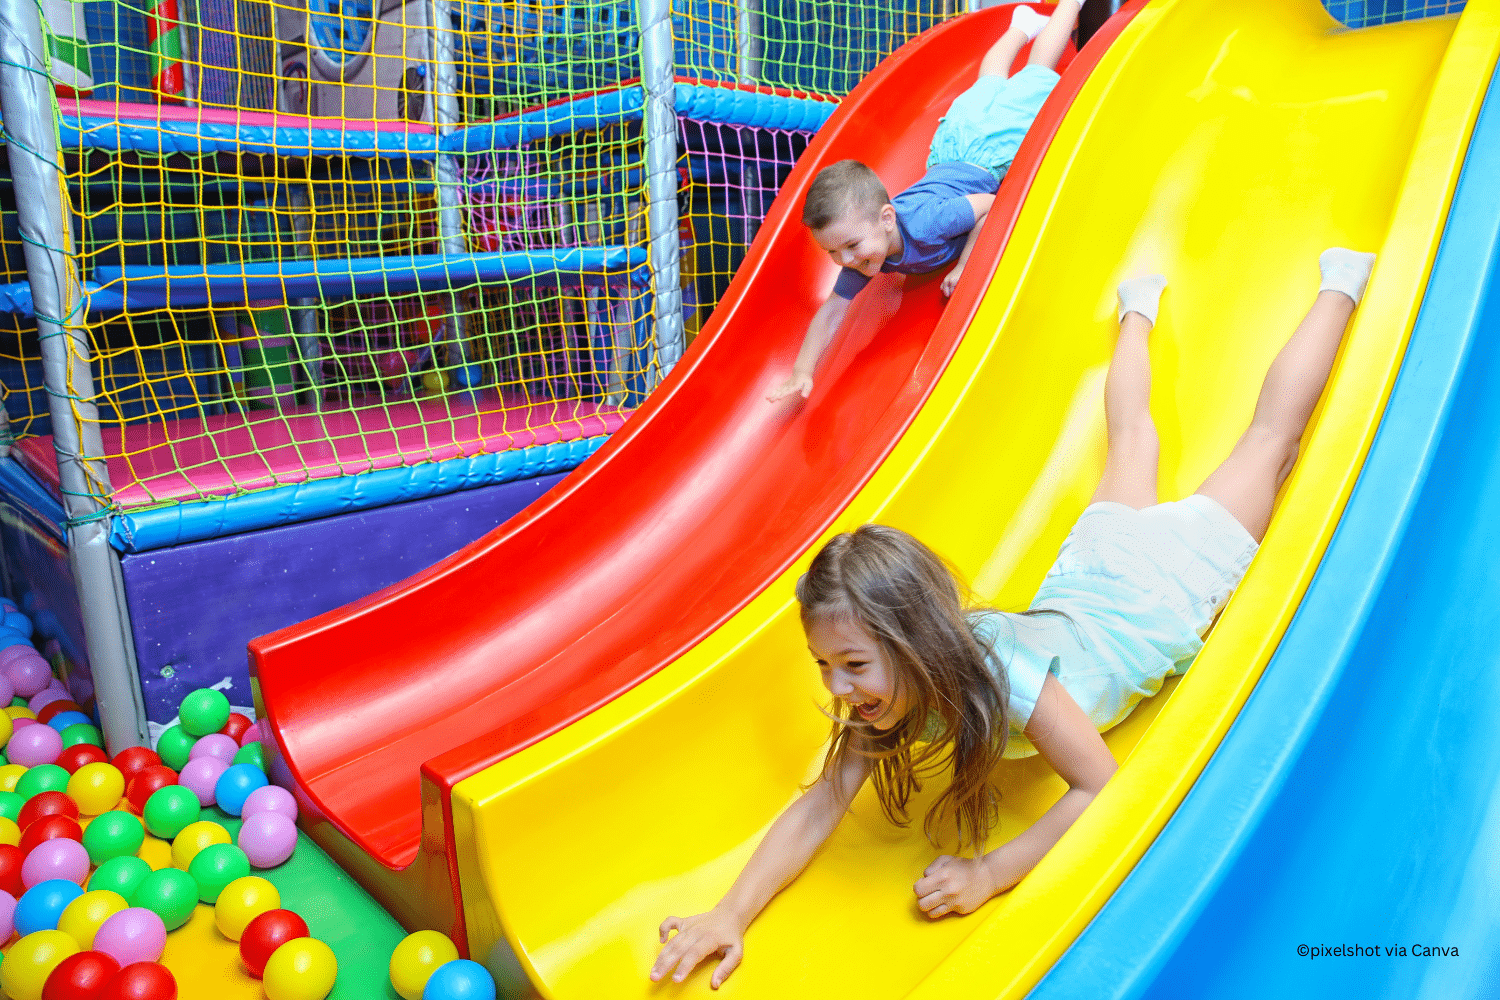 horizontal photo of some colorful slides into a ball pit